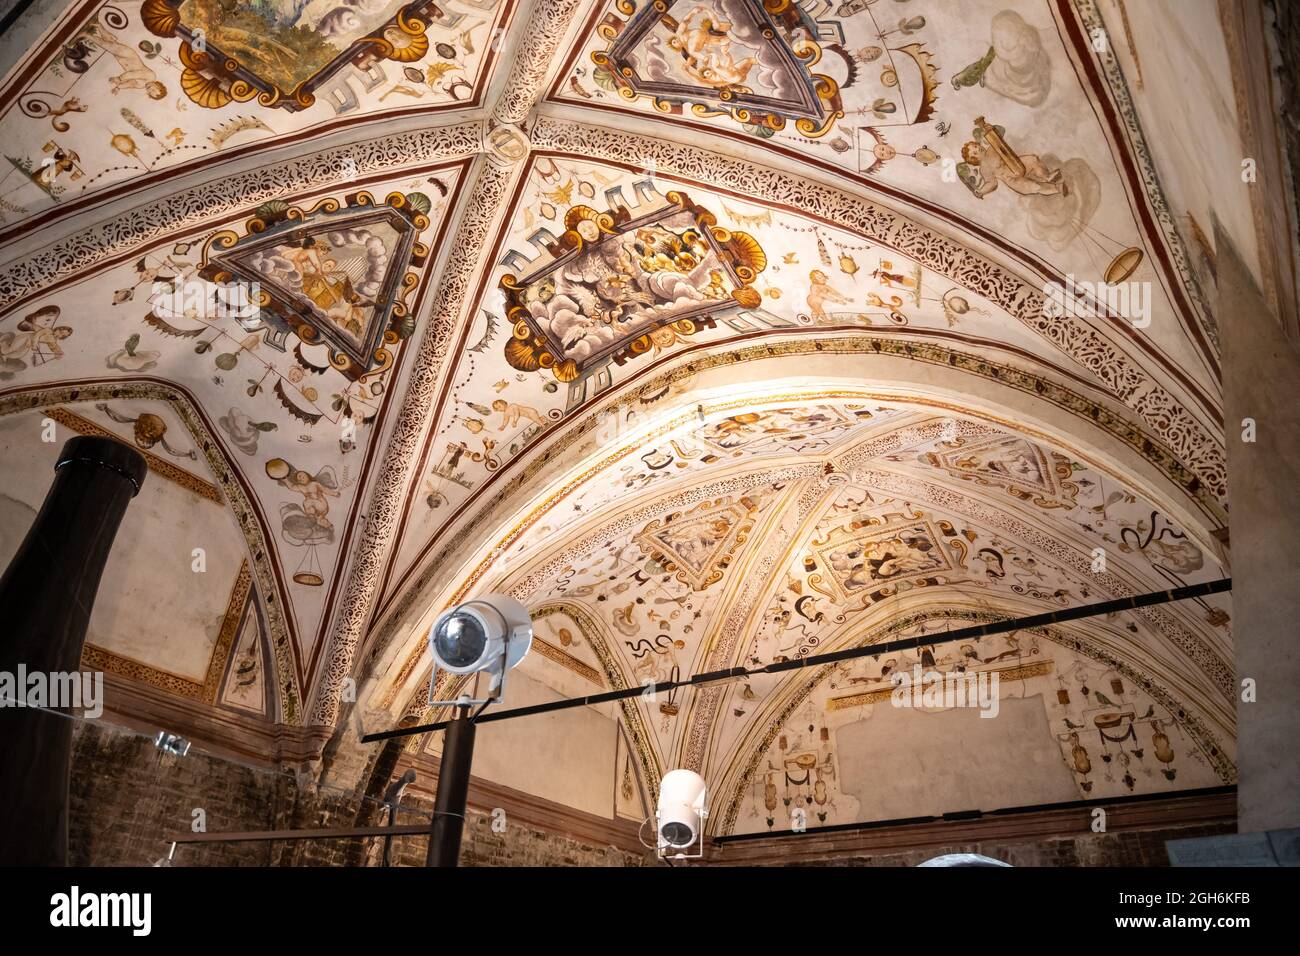 Grinzane Cavour-August 2021-italy Splendid frescoed ceilings inside the Castle of Grinzane Cavour, Unesco heritage Stock Photo